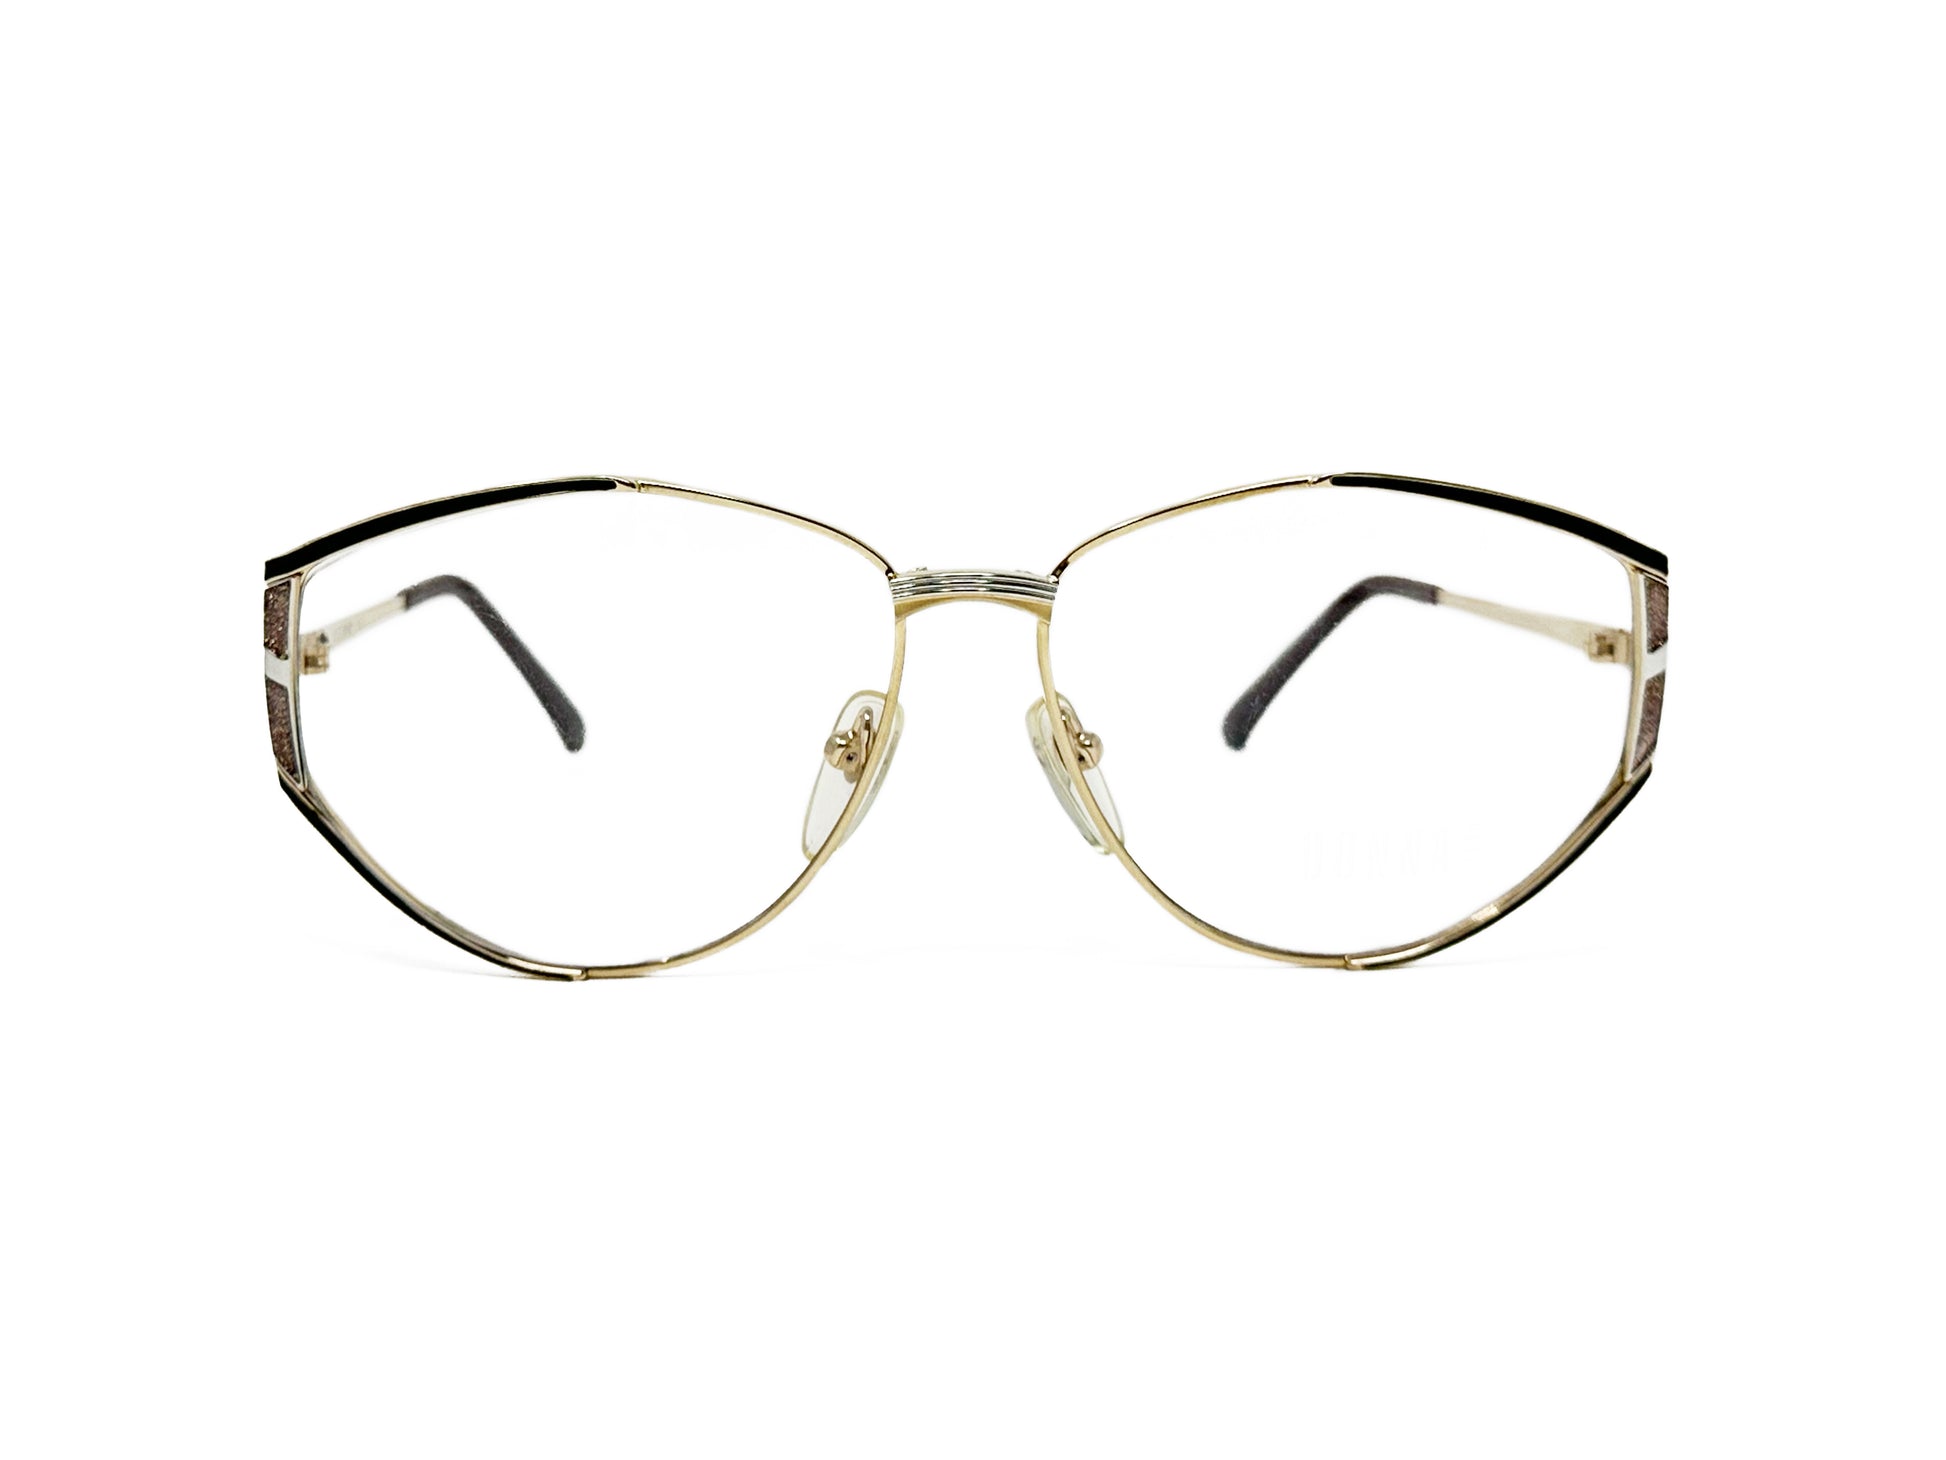 Donna House oversized, angular, metal optical frame with rounded bottom. Model: 4001. Color: 01 - Light Gold with black corners and silver metal accents. Front view. 